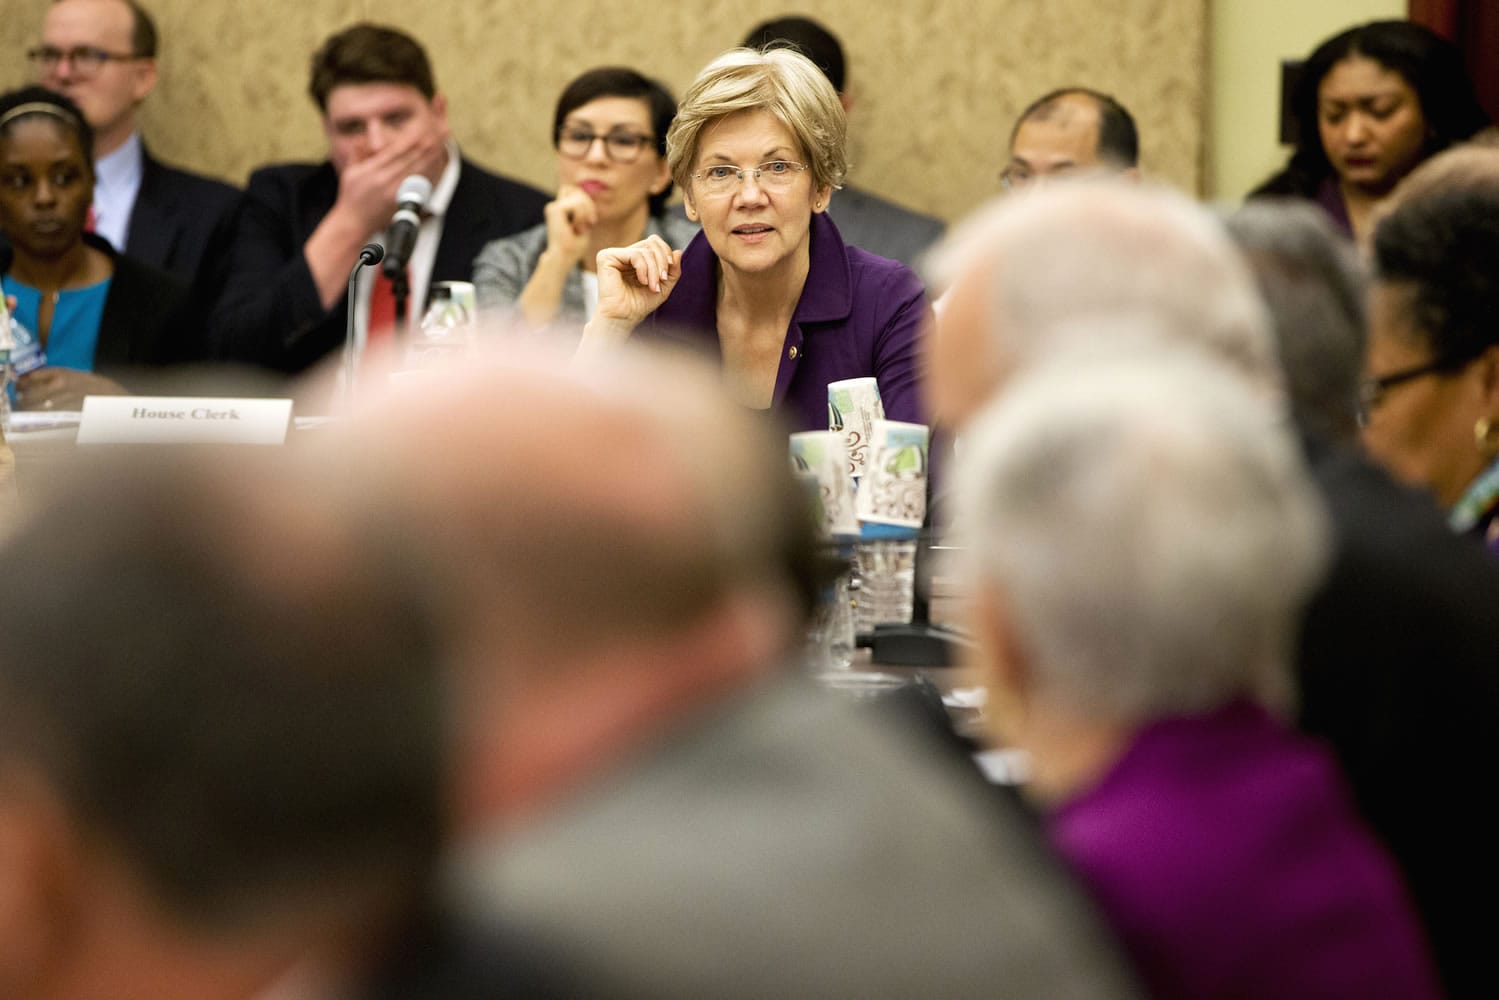 Sen. Elizabeth Warren, D-Mass., listens as House Education and the Workforce Committee Chairman Rep. John Kline, R-Minn., makes opening remarks on Capitol Hill in Washington, Wednesday, Nov. 18, 2015, as House and Senate negotiators try to resolve competing versions of a rewrite to the No Child Left Behind education law.